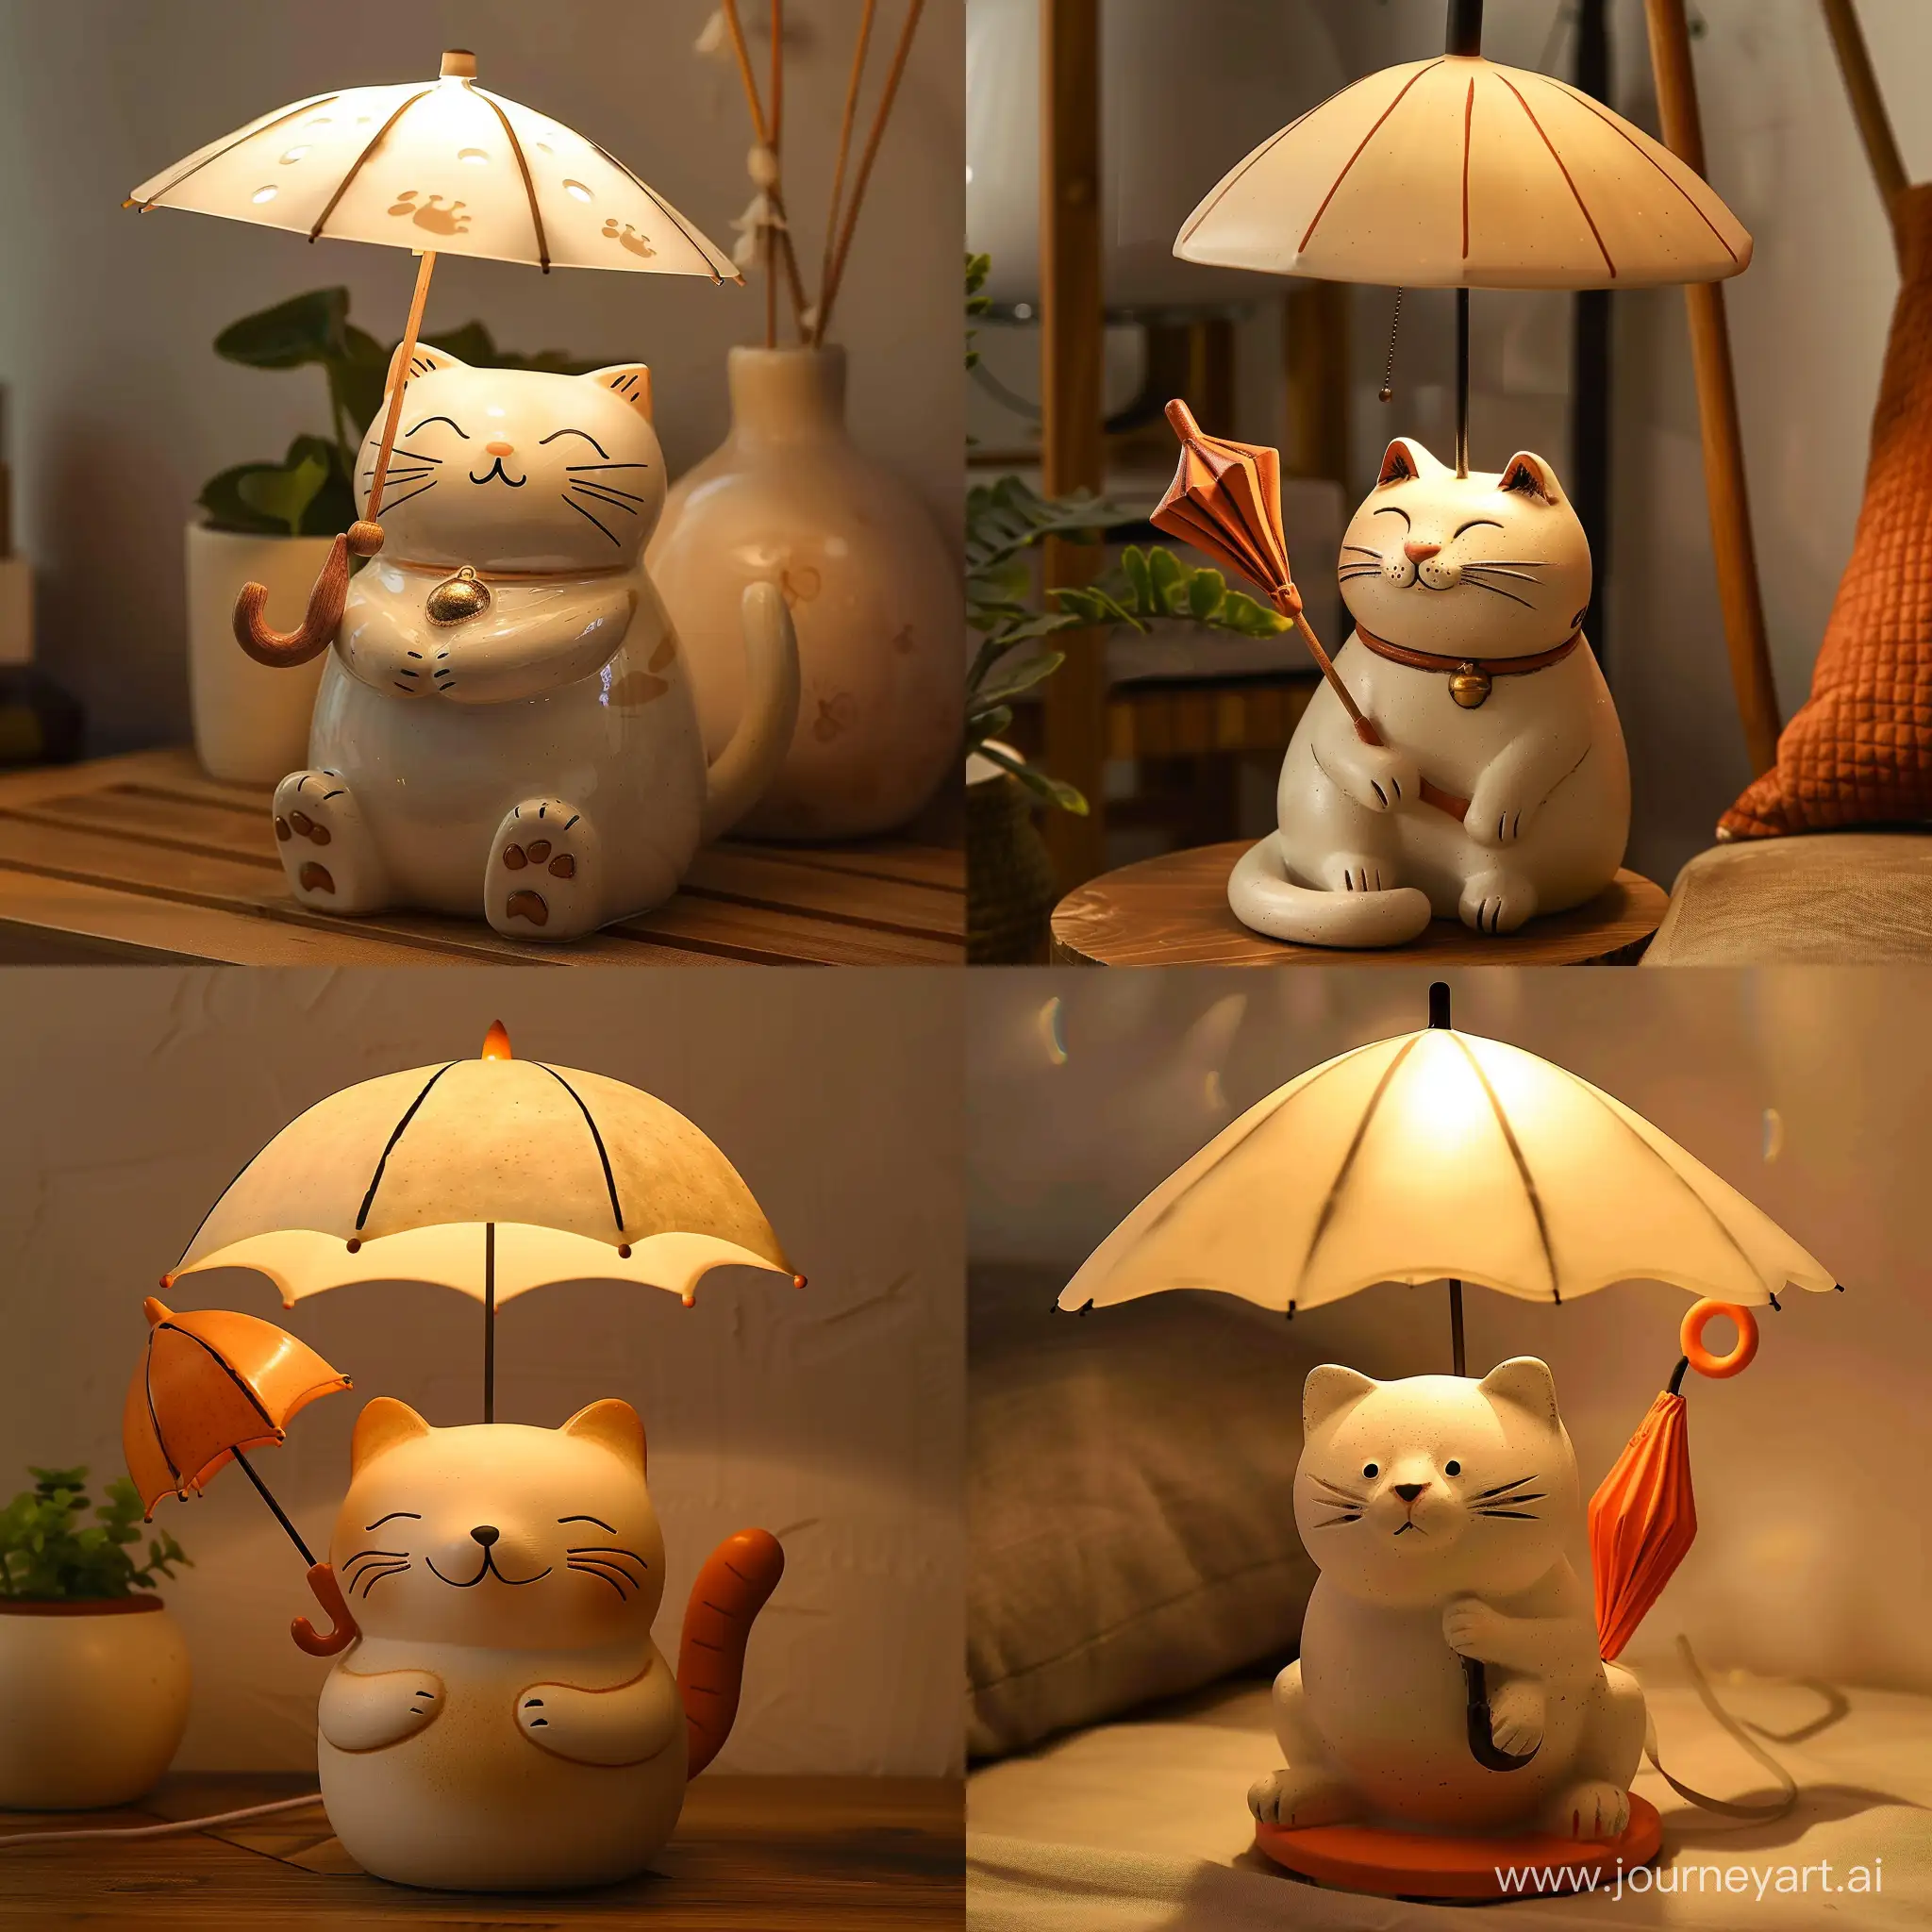 Whimsical-Catthemed-Table-Lamp-with-Umbrella-Shade